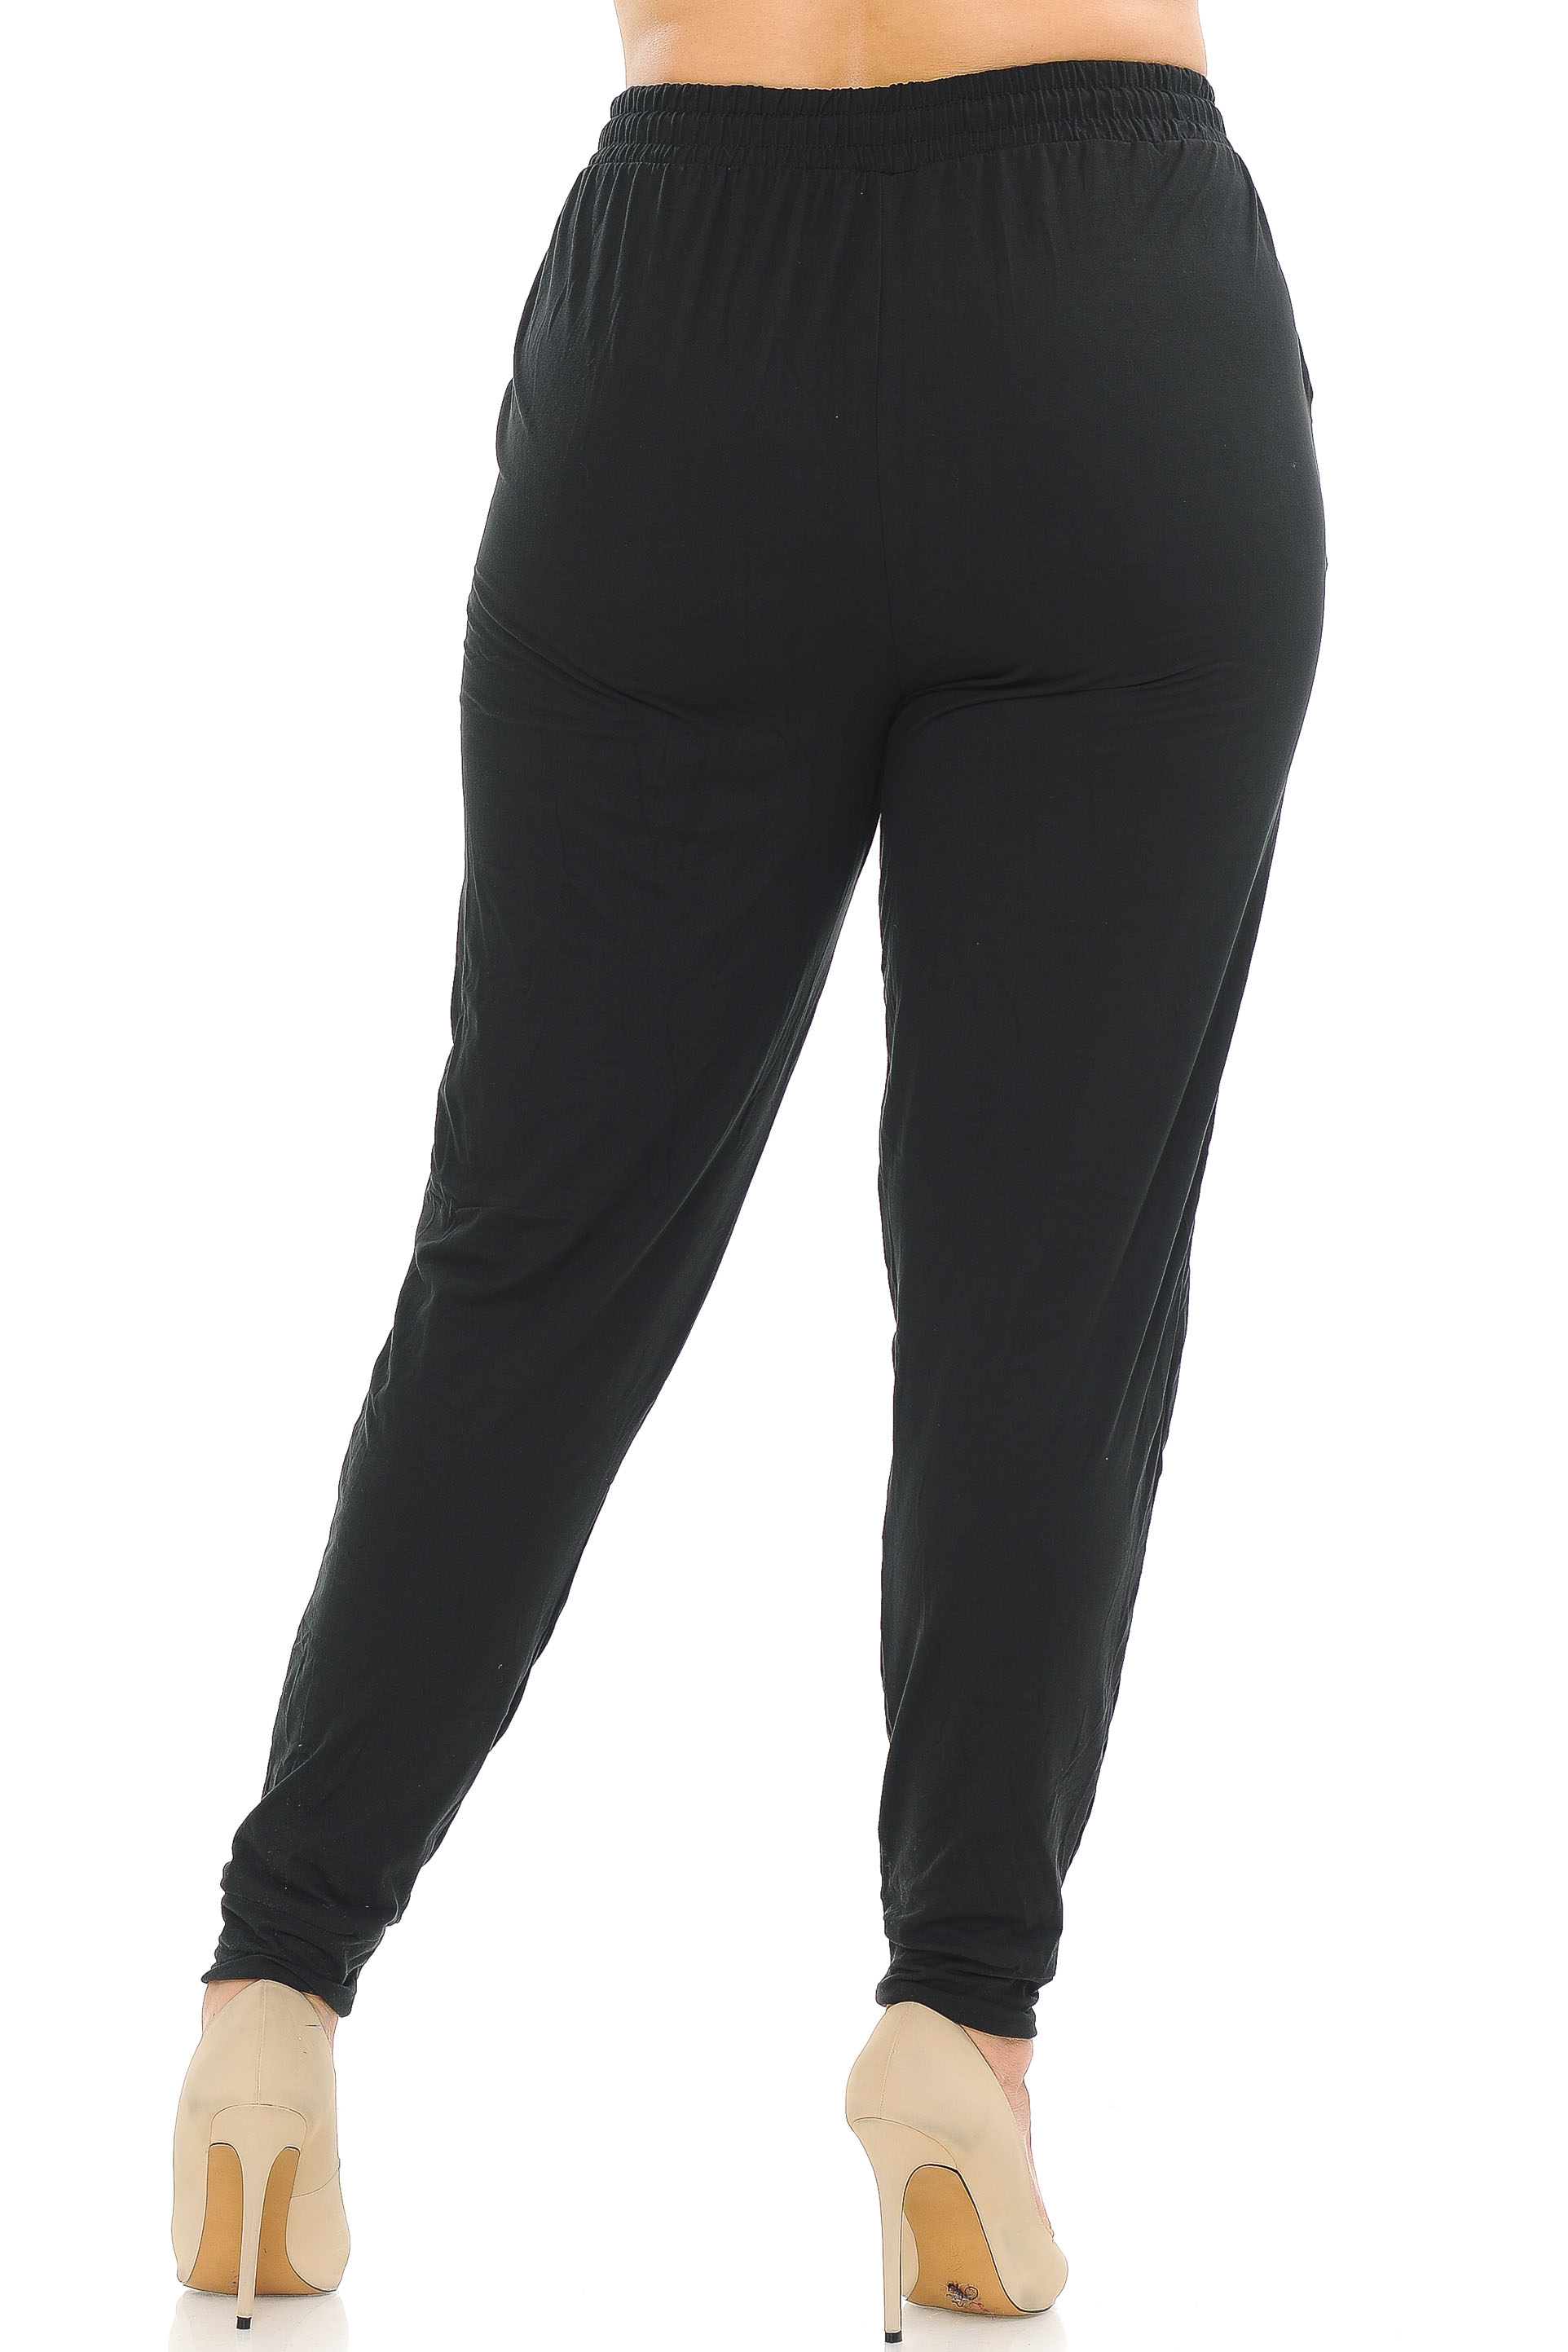 Wholesale Buttery Smooth Basic Black Solid Plus Size Joggers - EEVEE